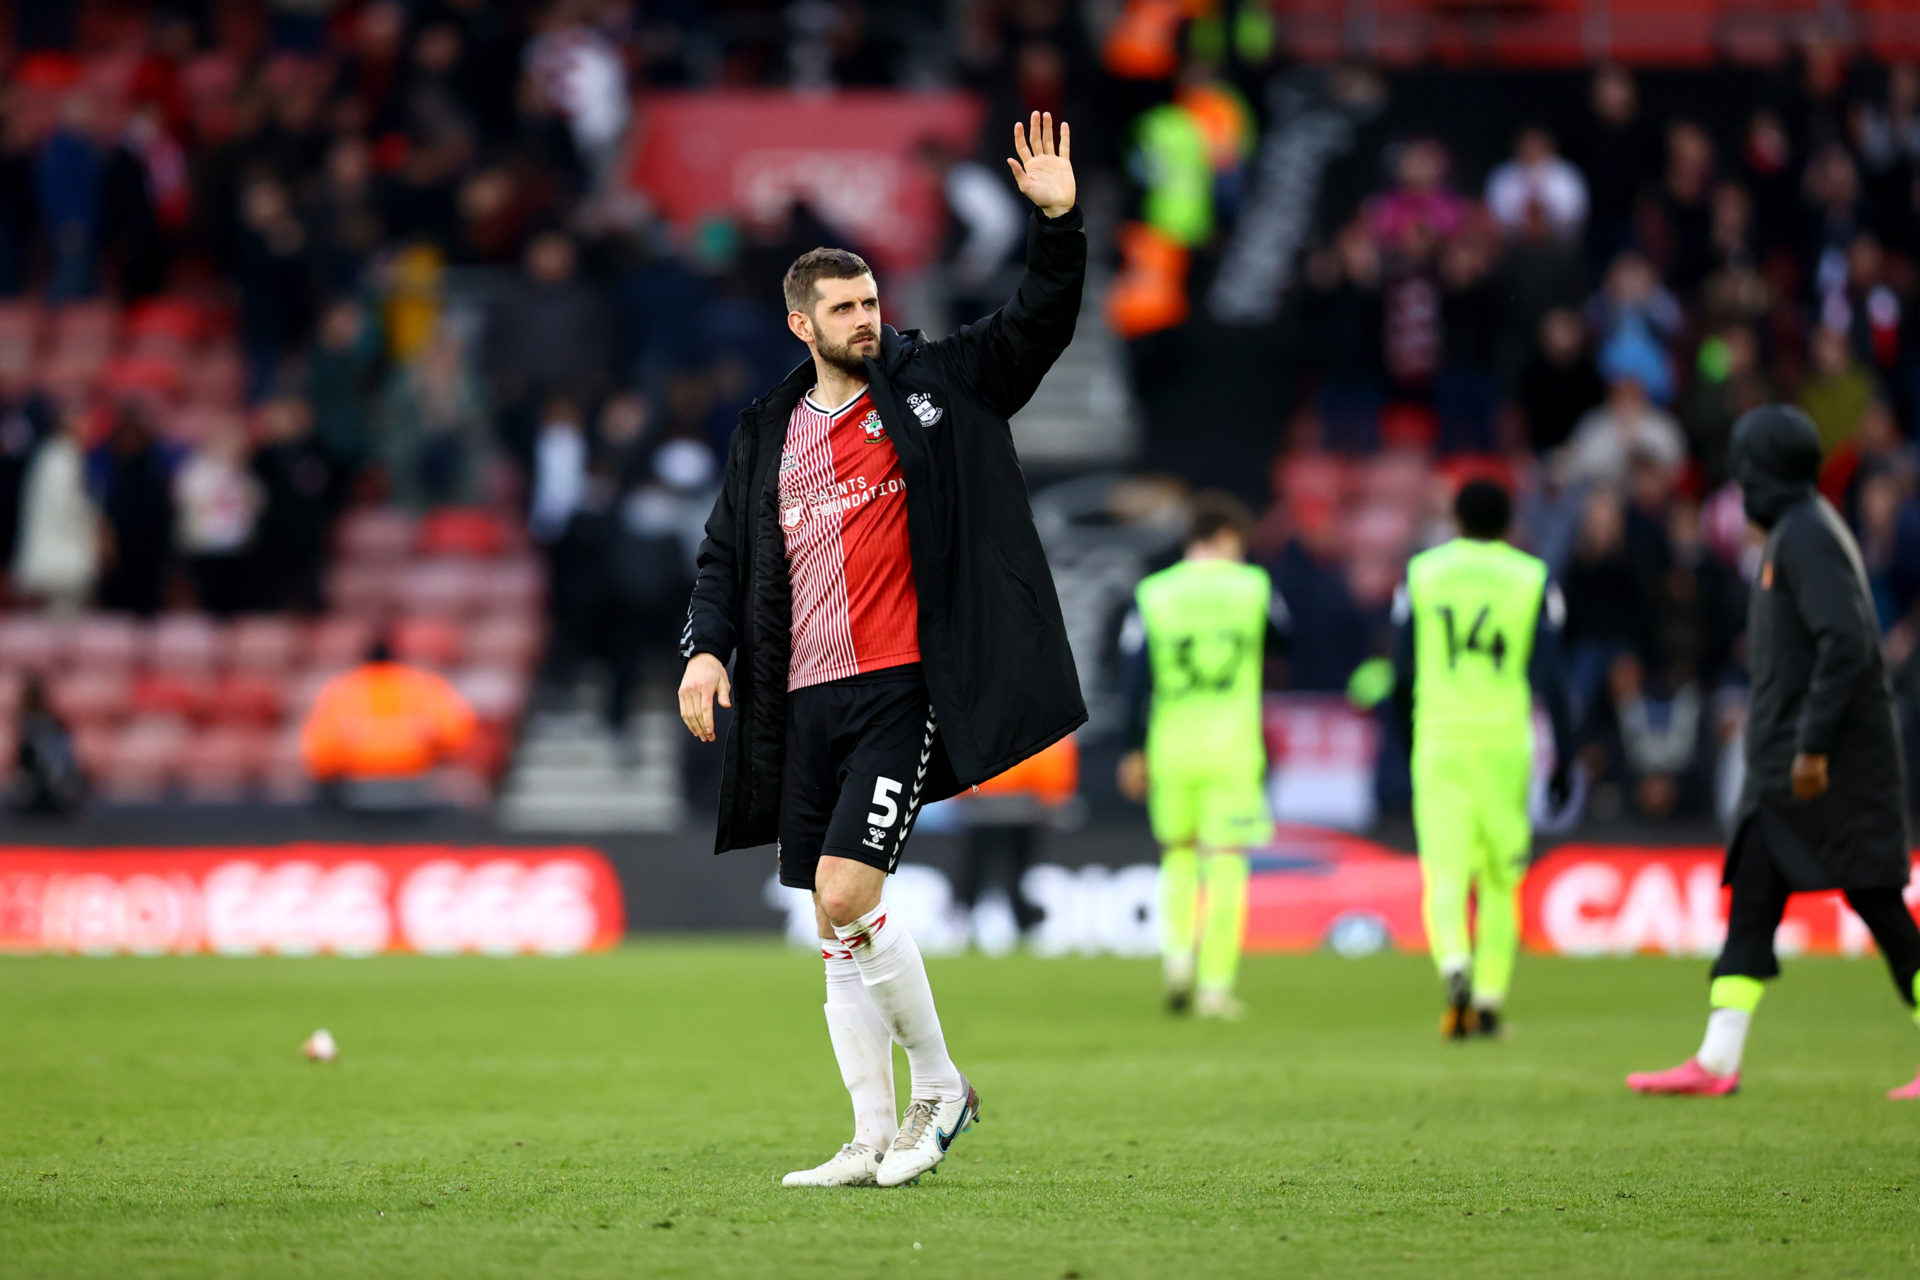 Russell Martin already has Jack Stephens upgrade waiting if Southampton get promoted